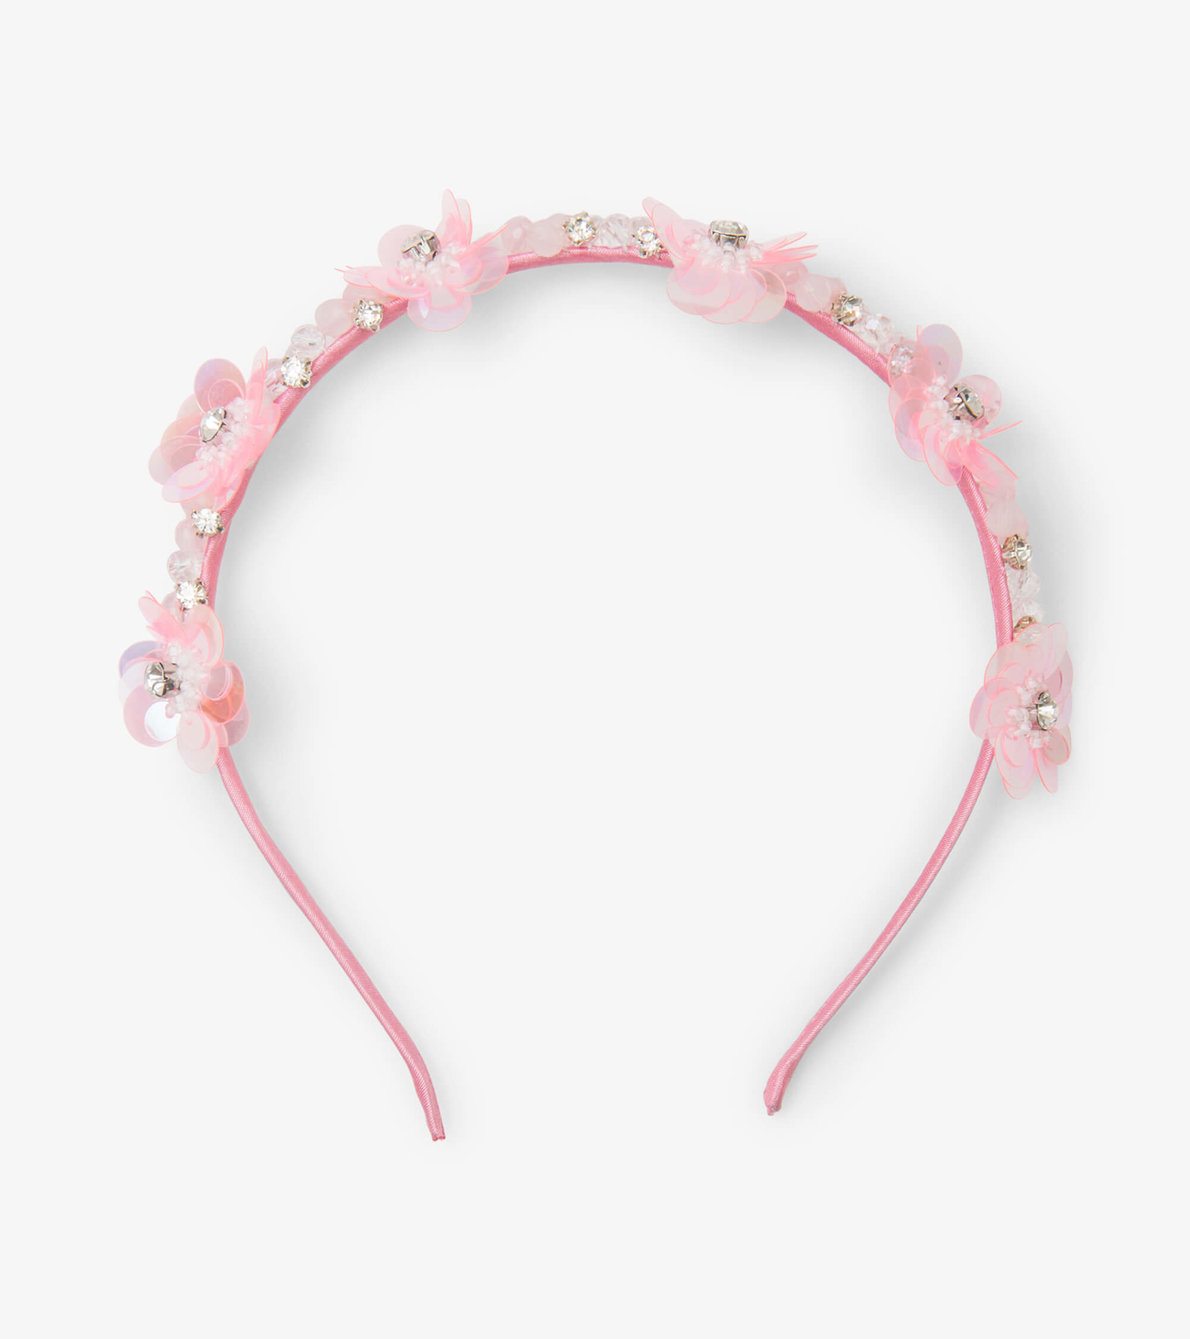 View larger image of Flower Crown Headband